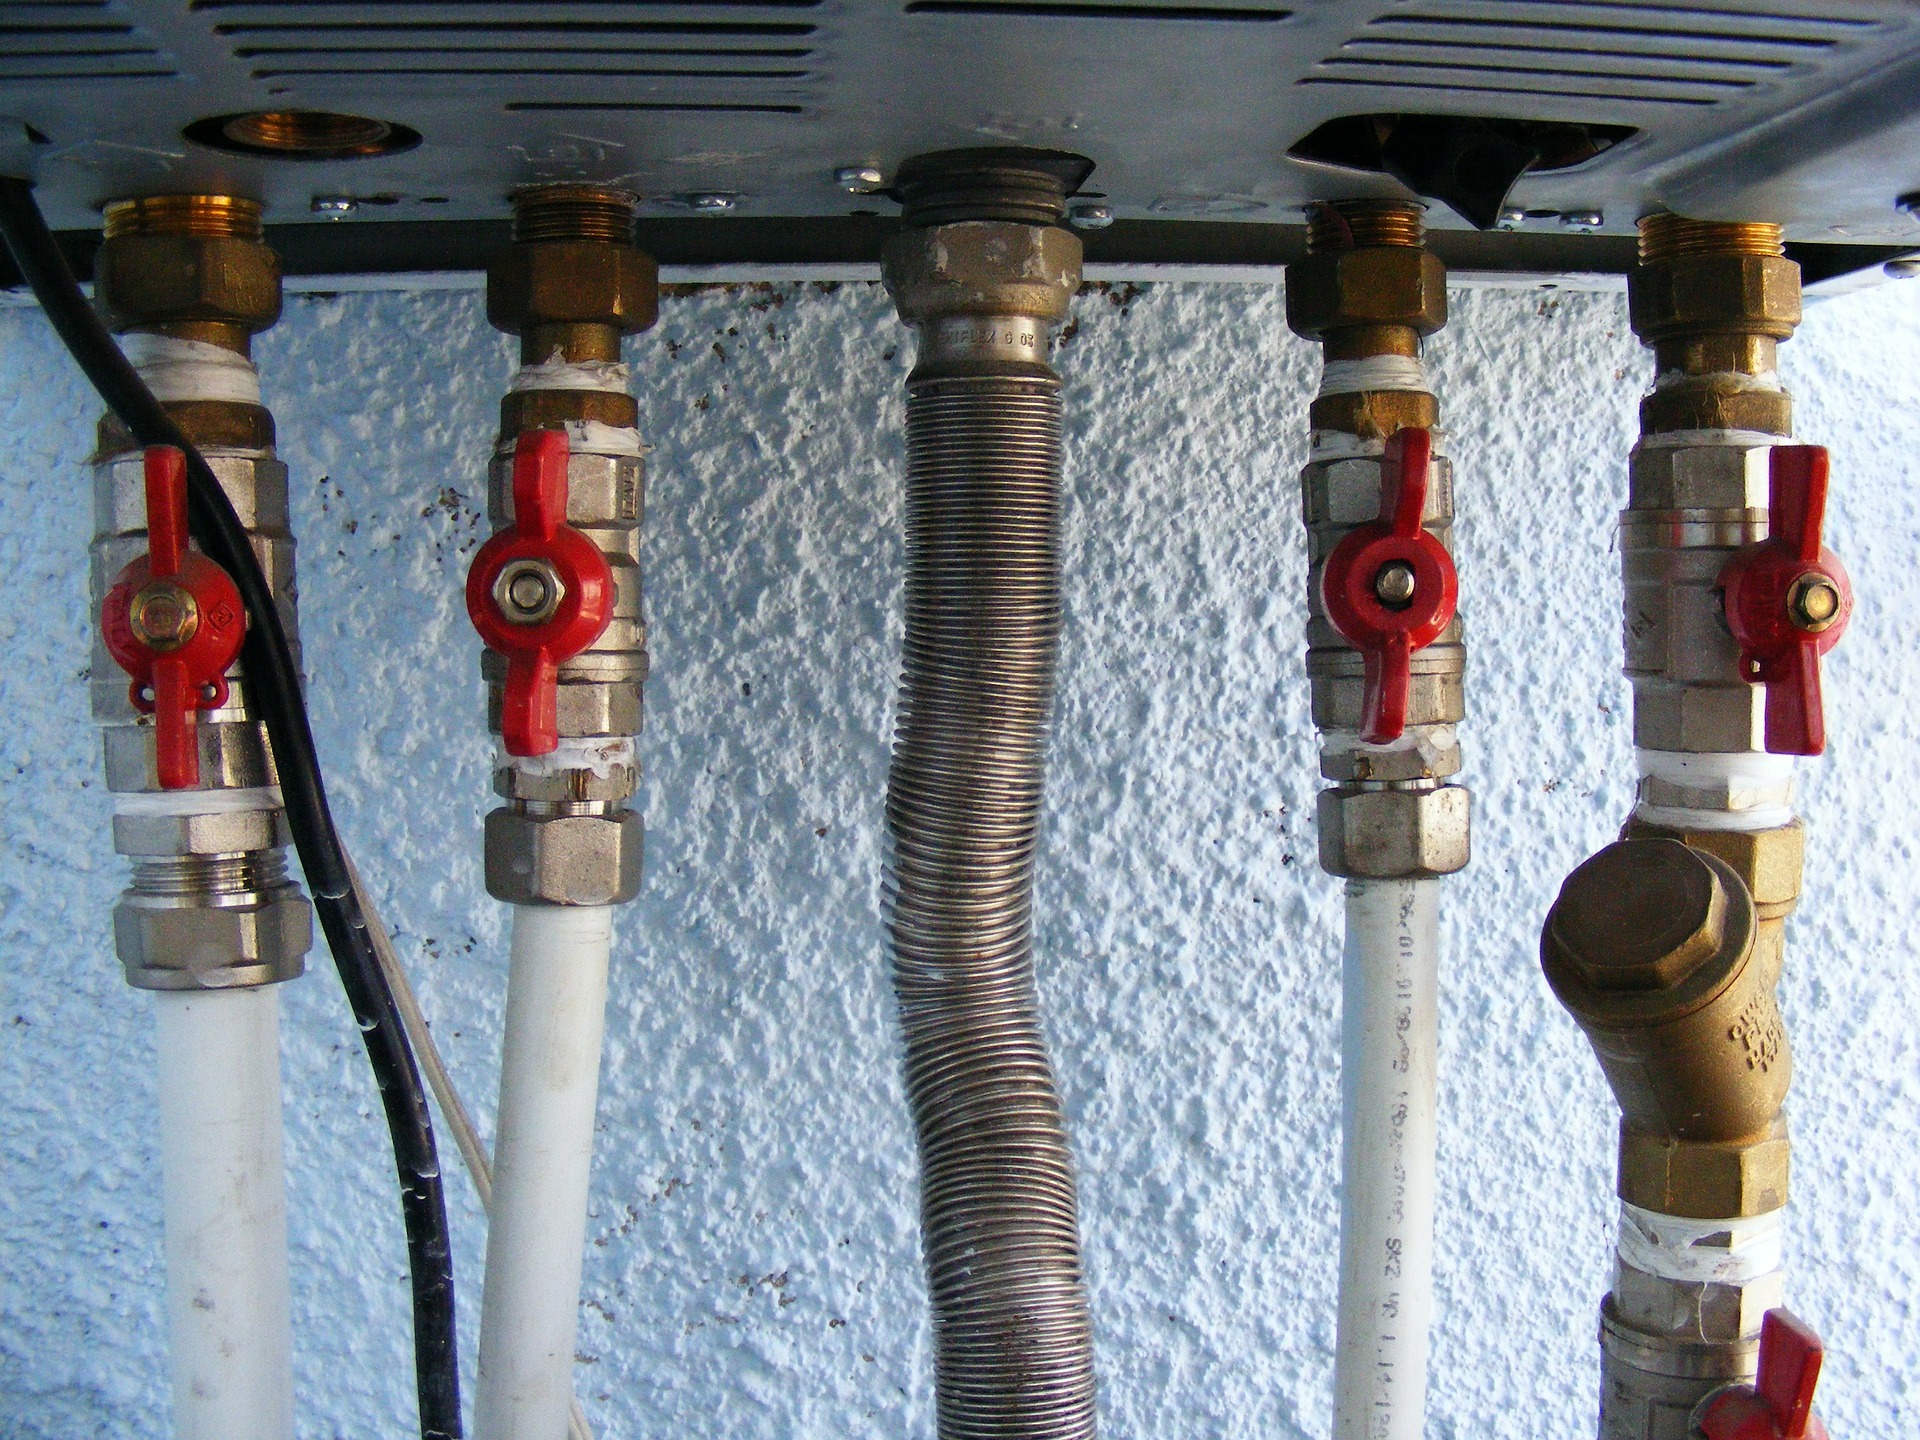 Image of the underneath of a gas boiler